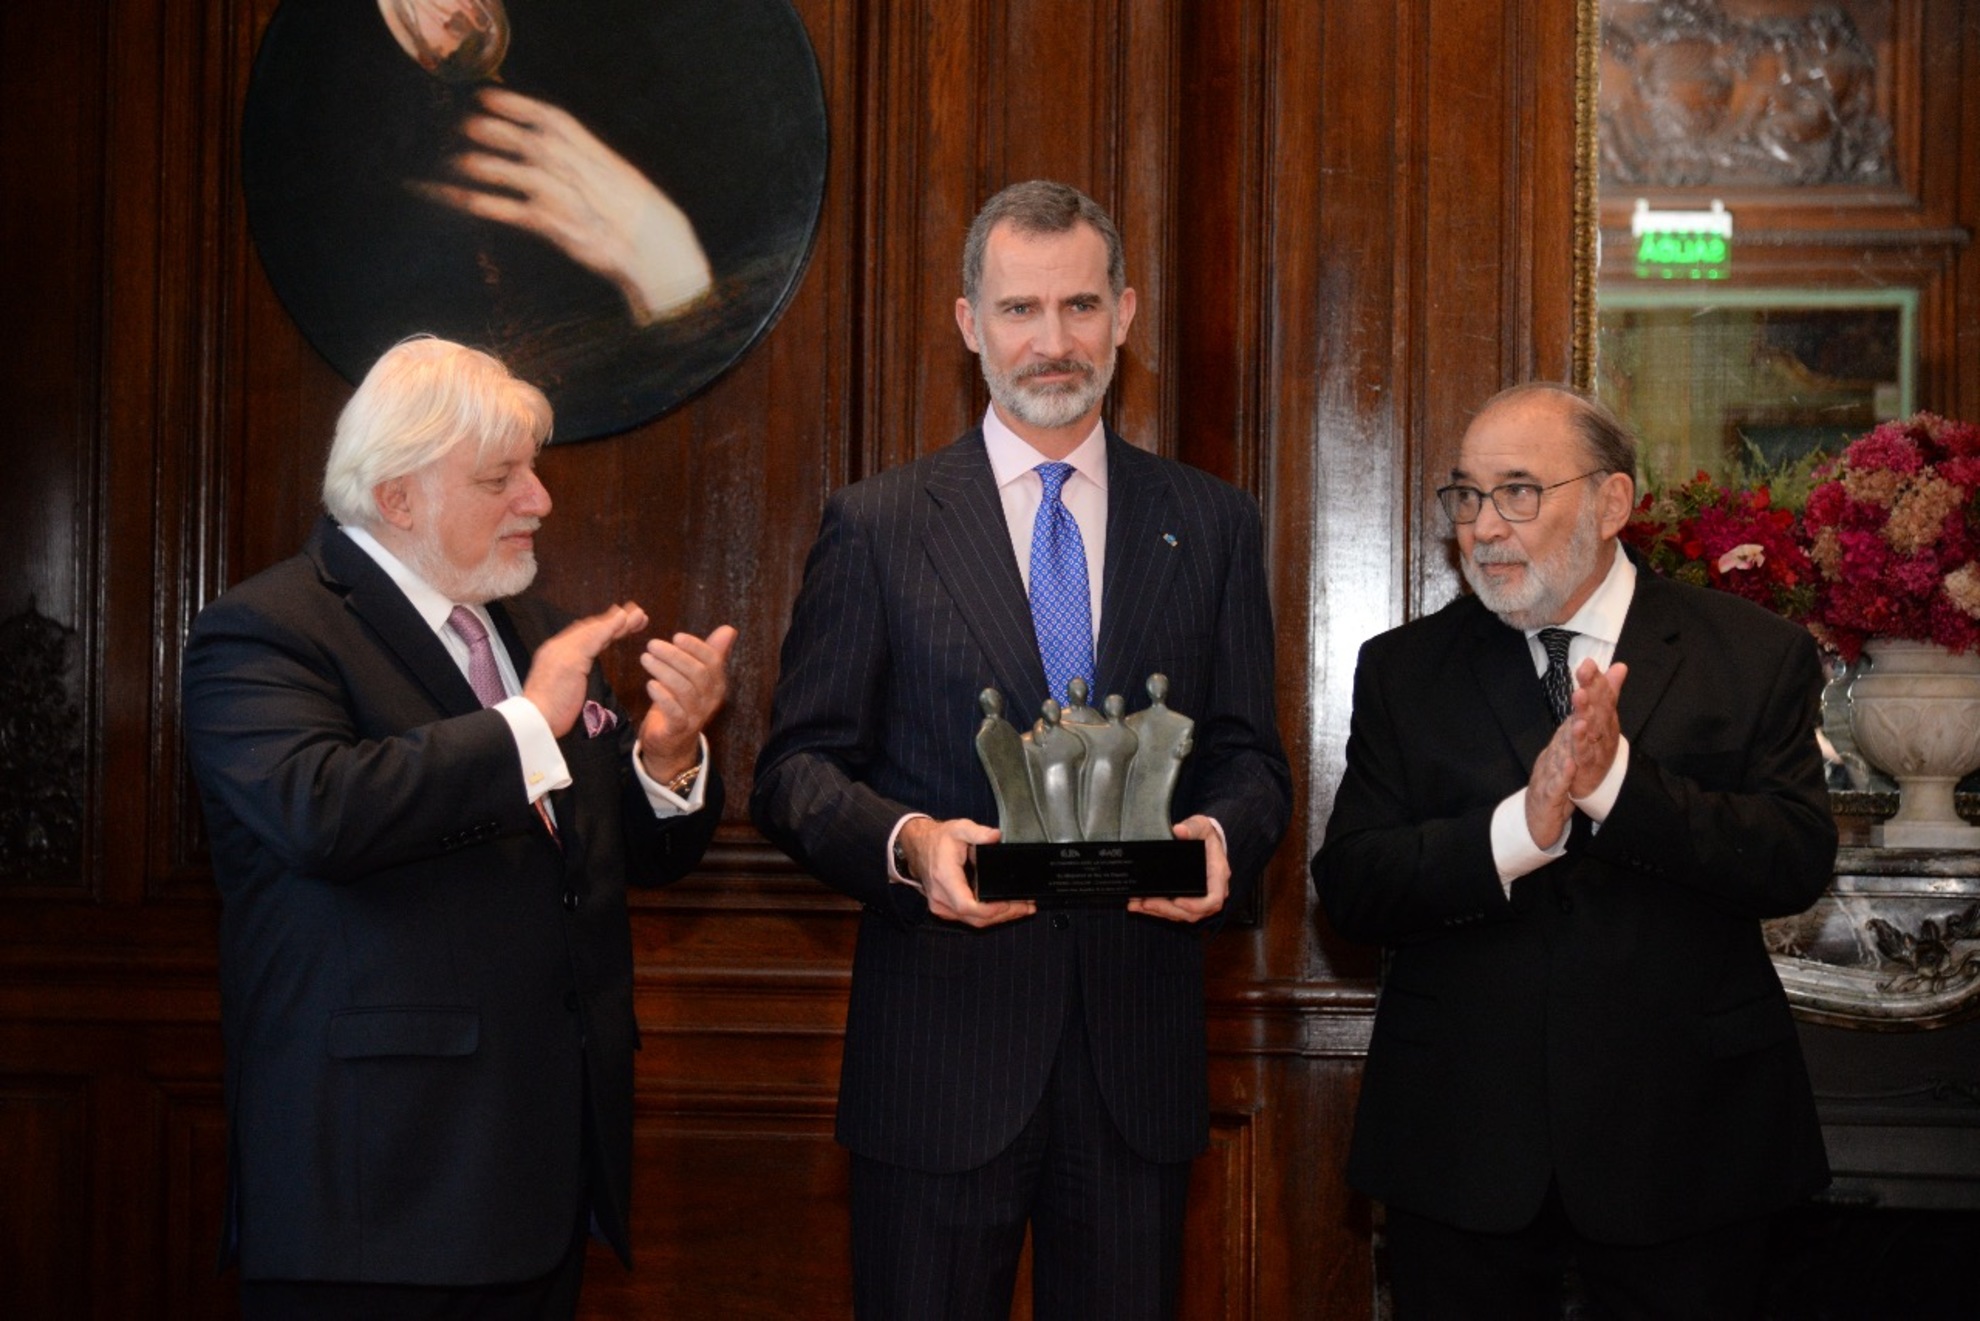 Shalom Prize awarded to Spanish king in recognition of restitution for Sephardic Jews